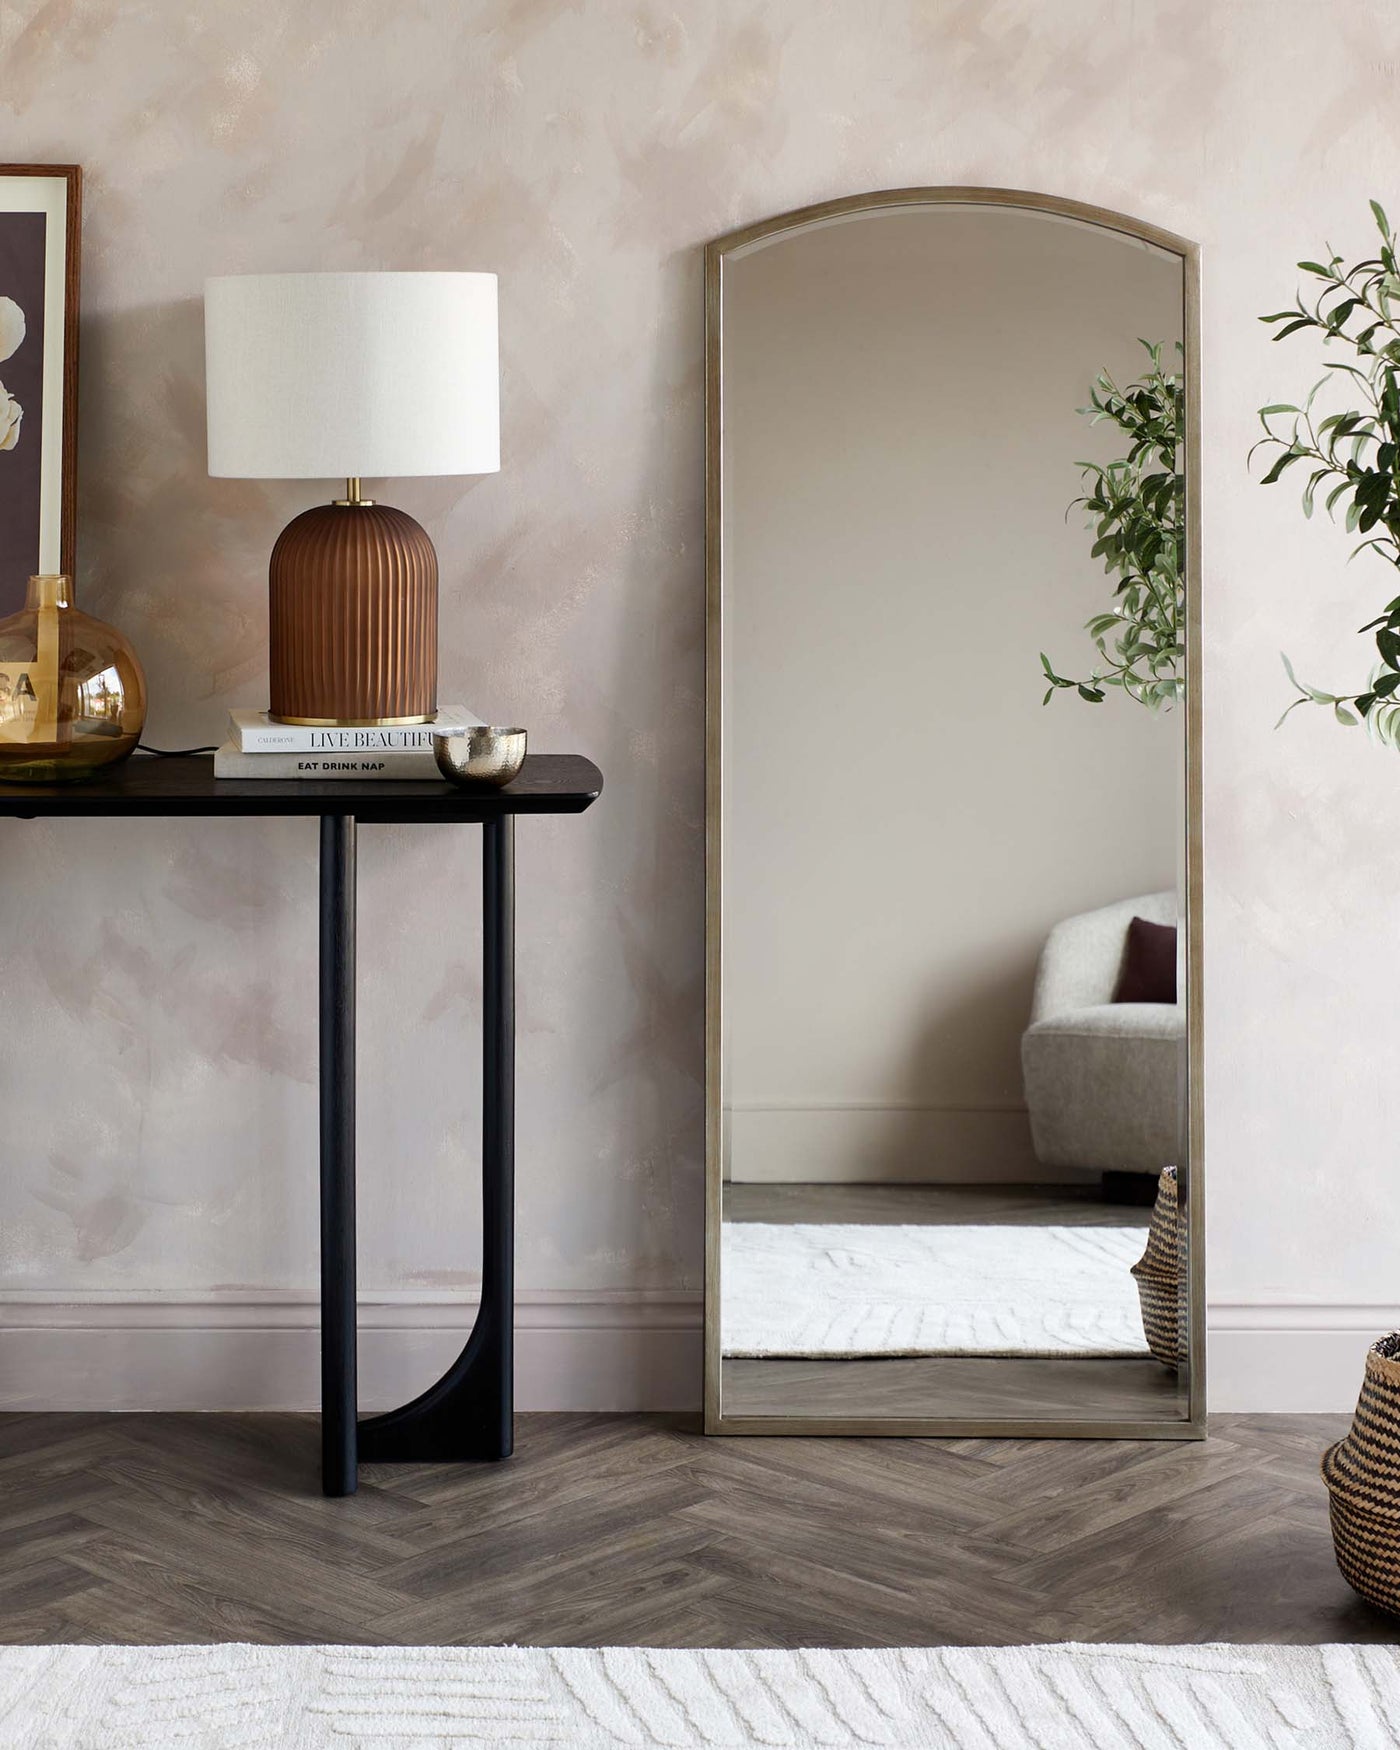 Elegant black console table with a straight front, narrow rectangular shape, and two vertical support legs at one end, complemented by a modern, oversized arch-top floor mirror with a minimalistic metallic frame.